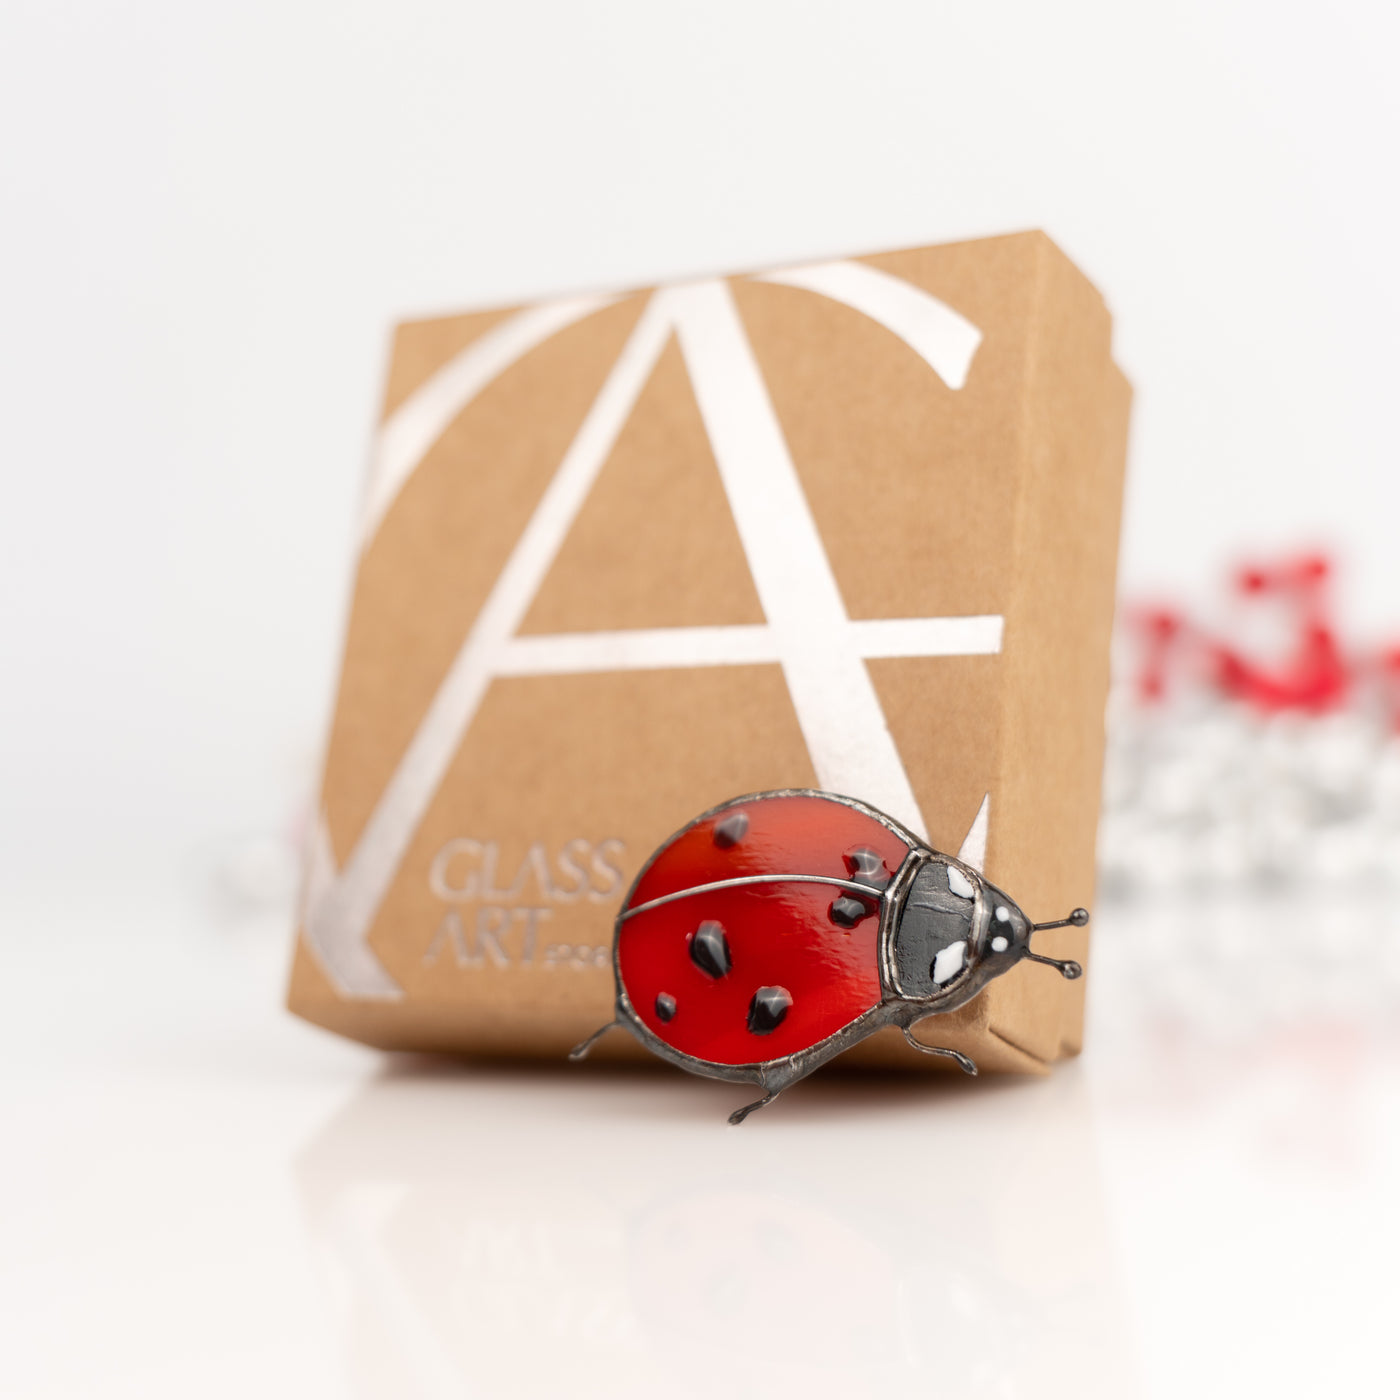 Stained glass ladybug brooch and the brand box